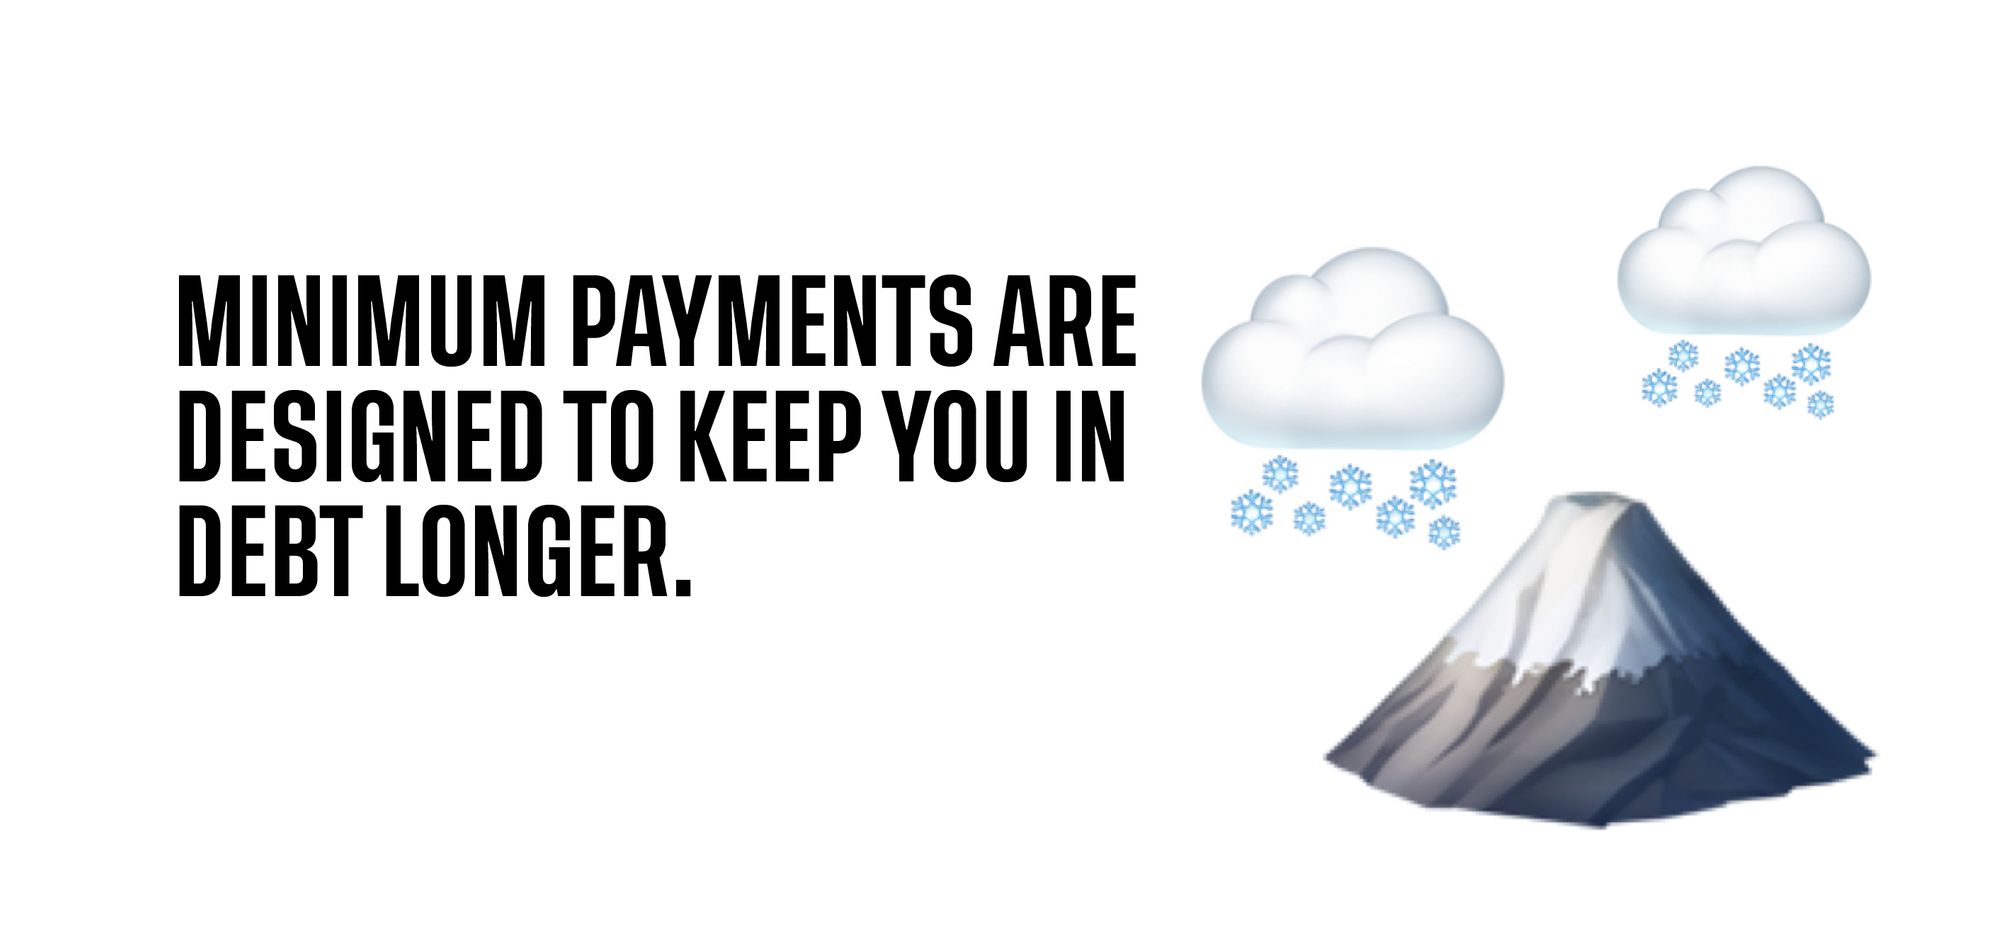 Minimum payments are designed to keep you in debt longer.